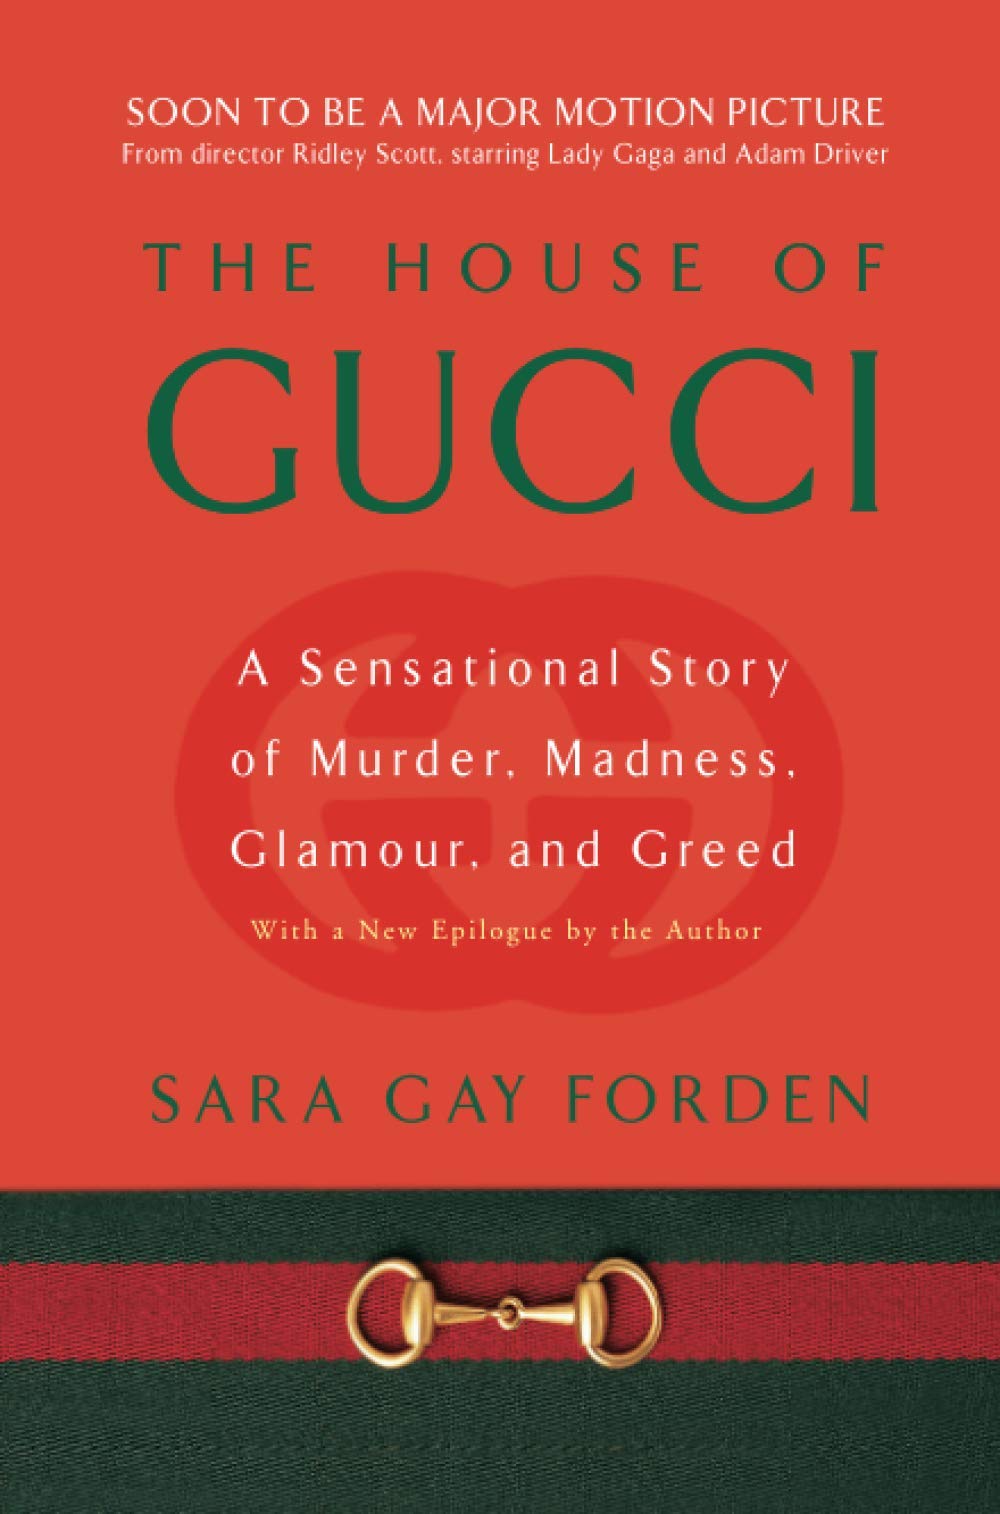 Book 149 – The House of Gucci by Sara Gay Forden